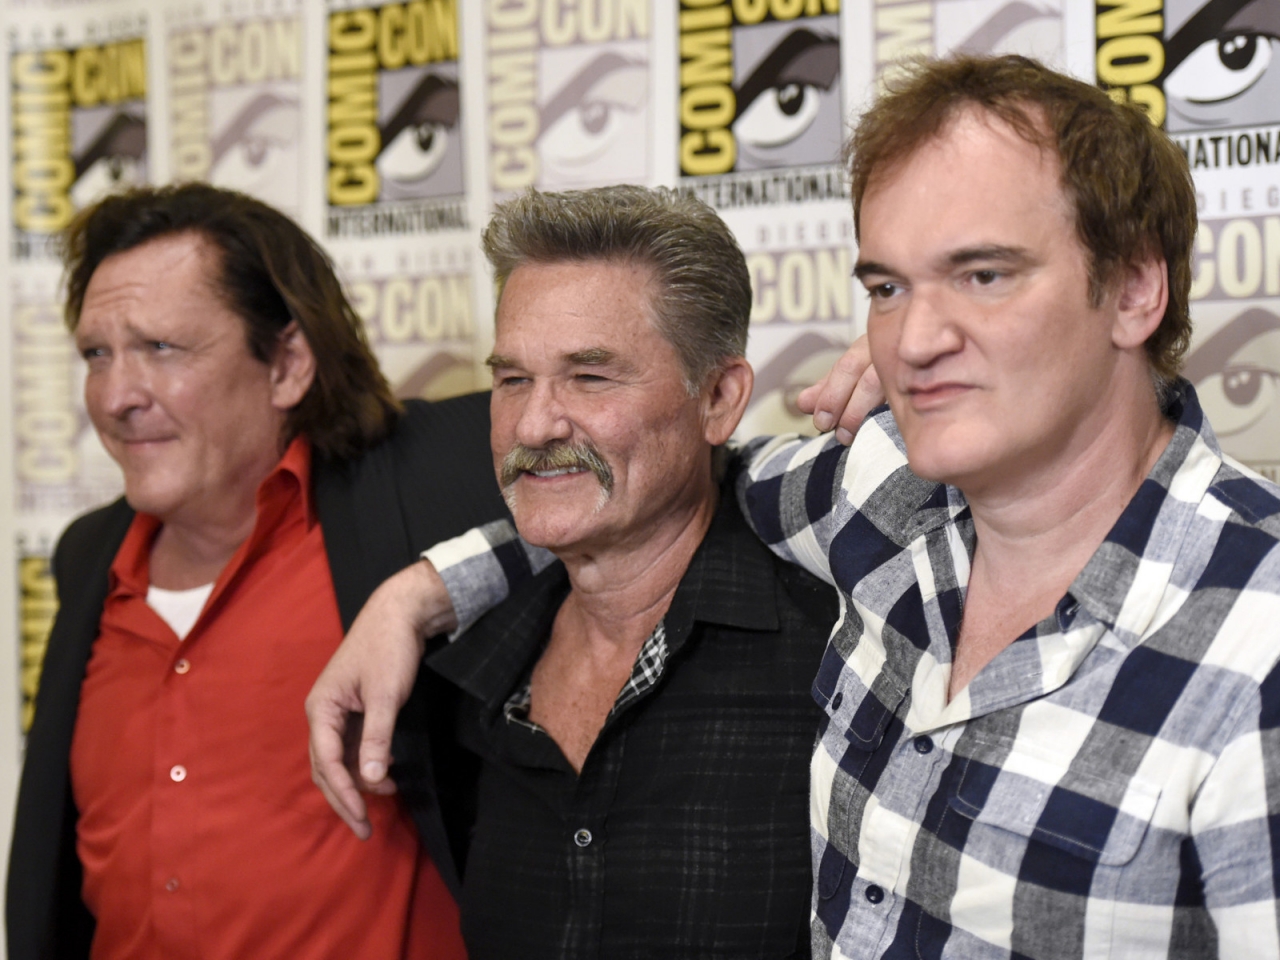 The Hateful Eight at Comic Con for 1280 x 960 resolution